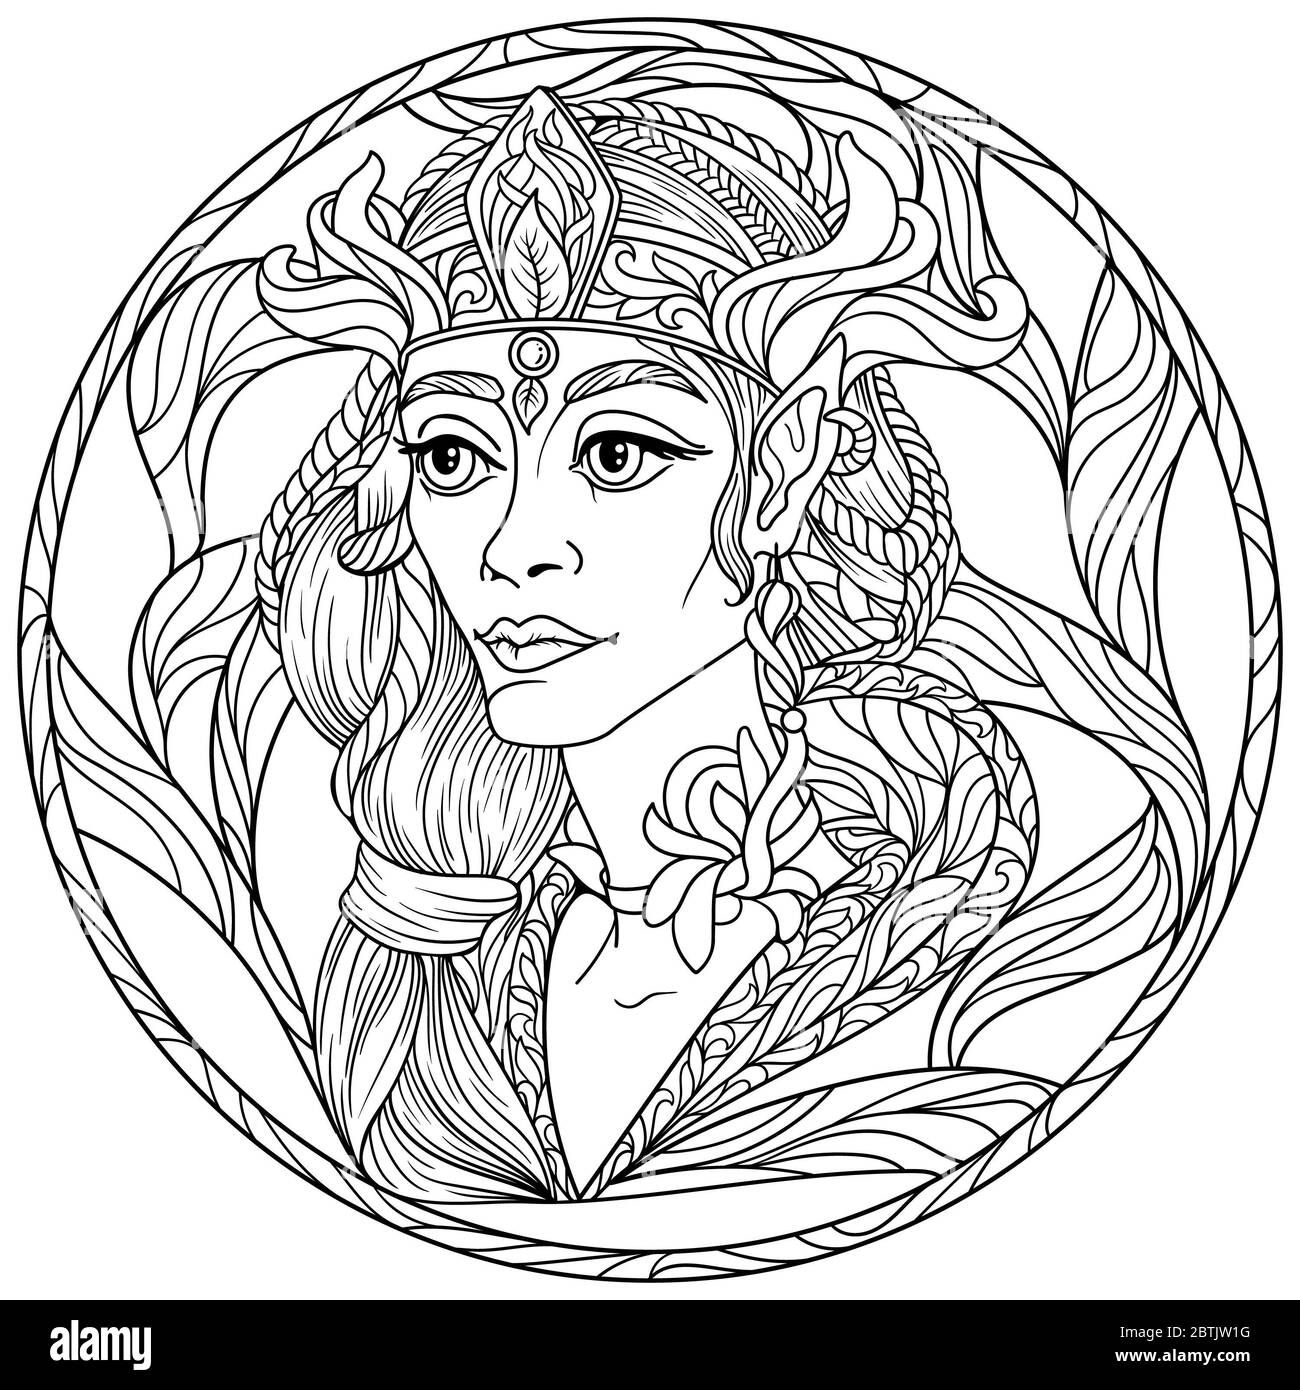 Zentangle fantasy coloring page for adults anti stress with beautiful girl elf  face with black and white background Stock Photo